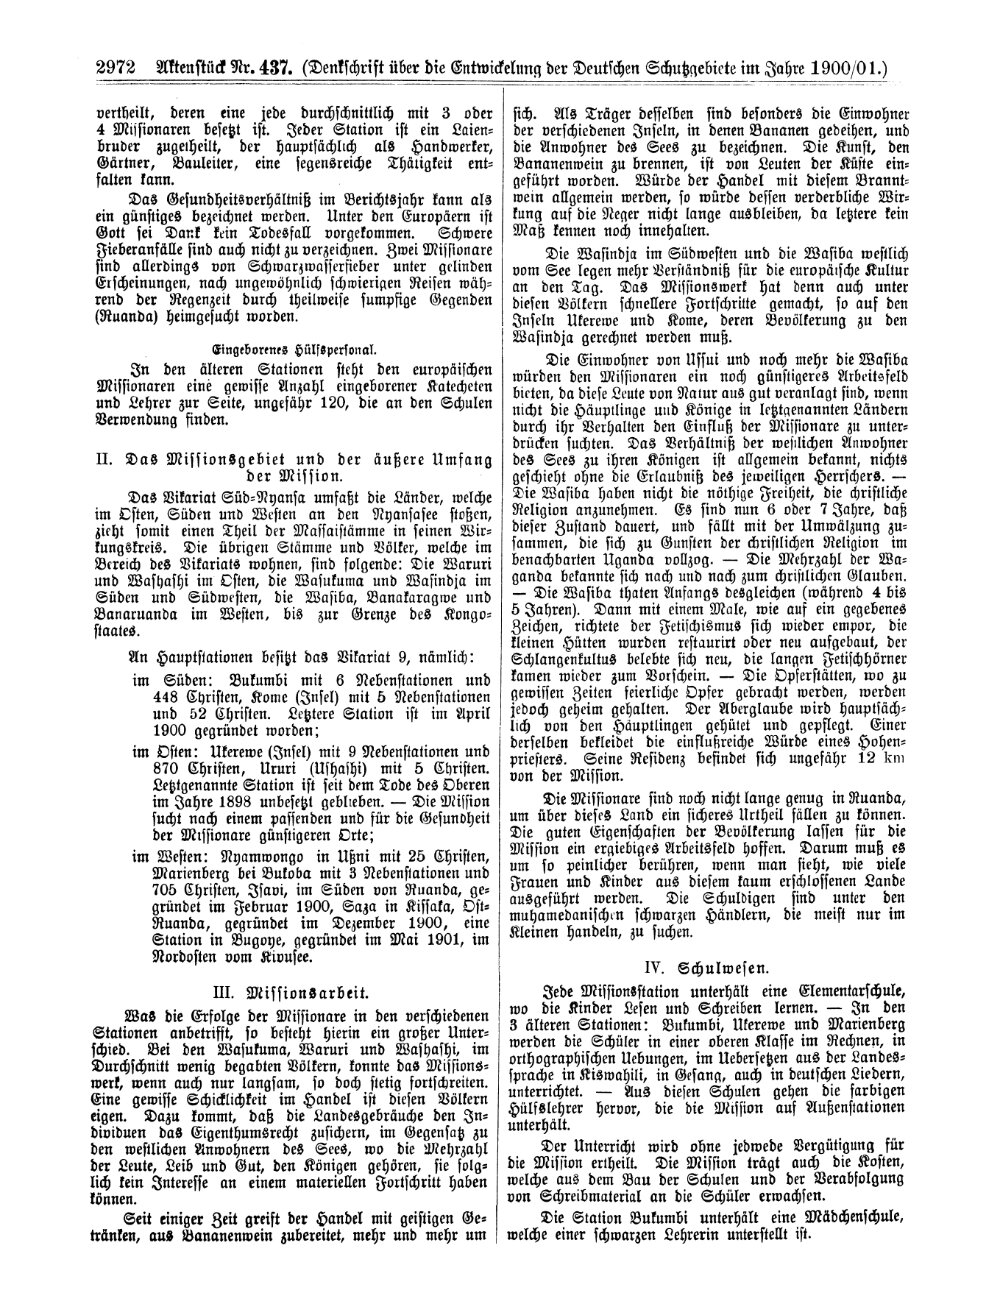 Scan of page 2972